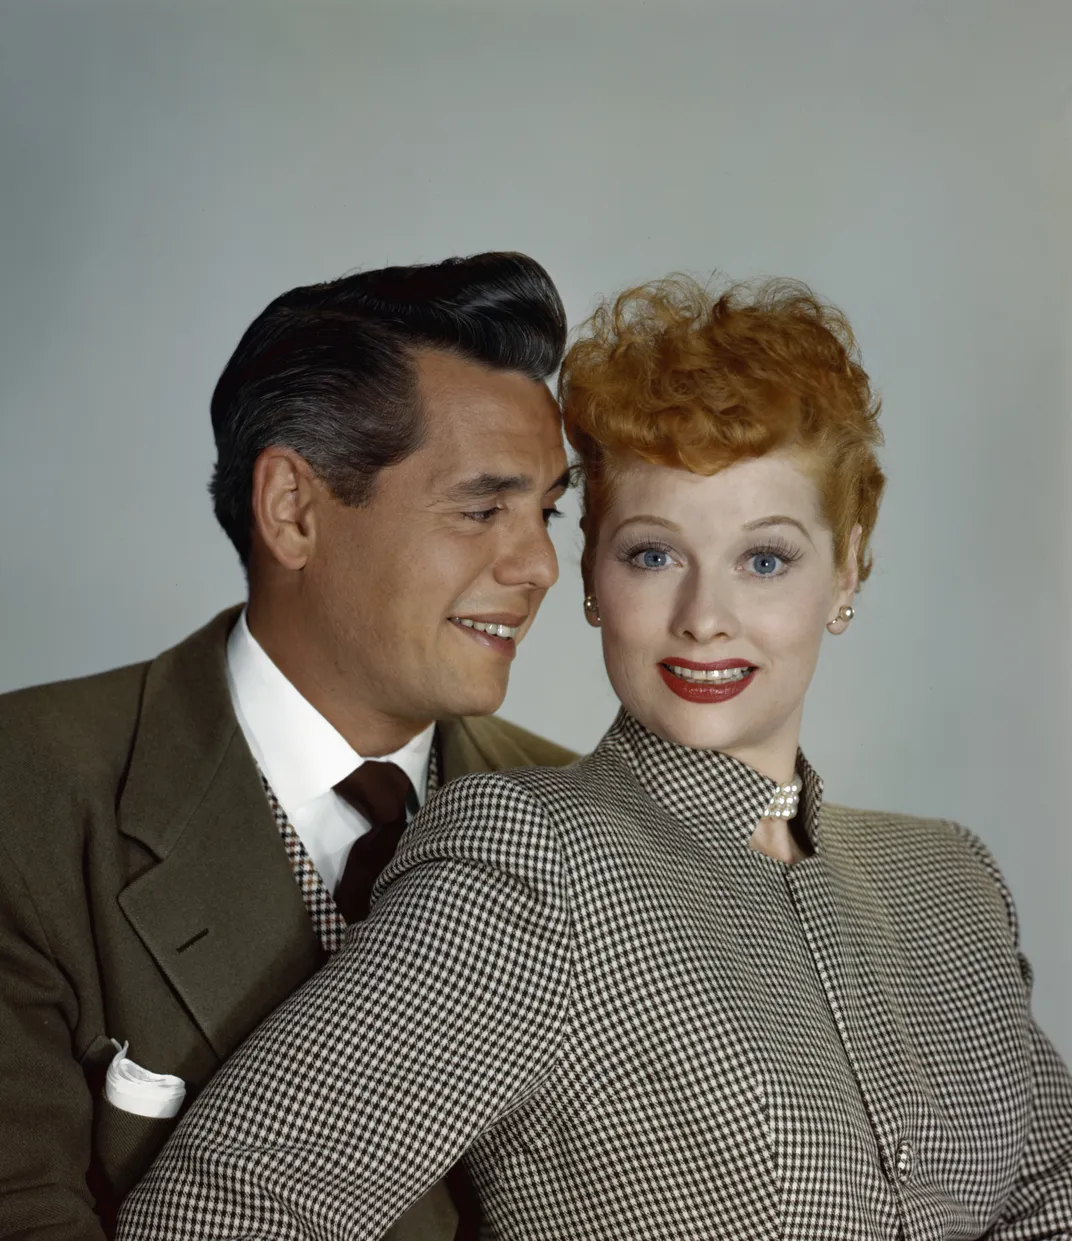 Lucille Ball and Desi Arnaz in the 1950s